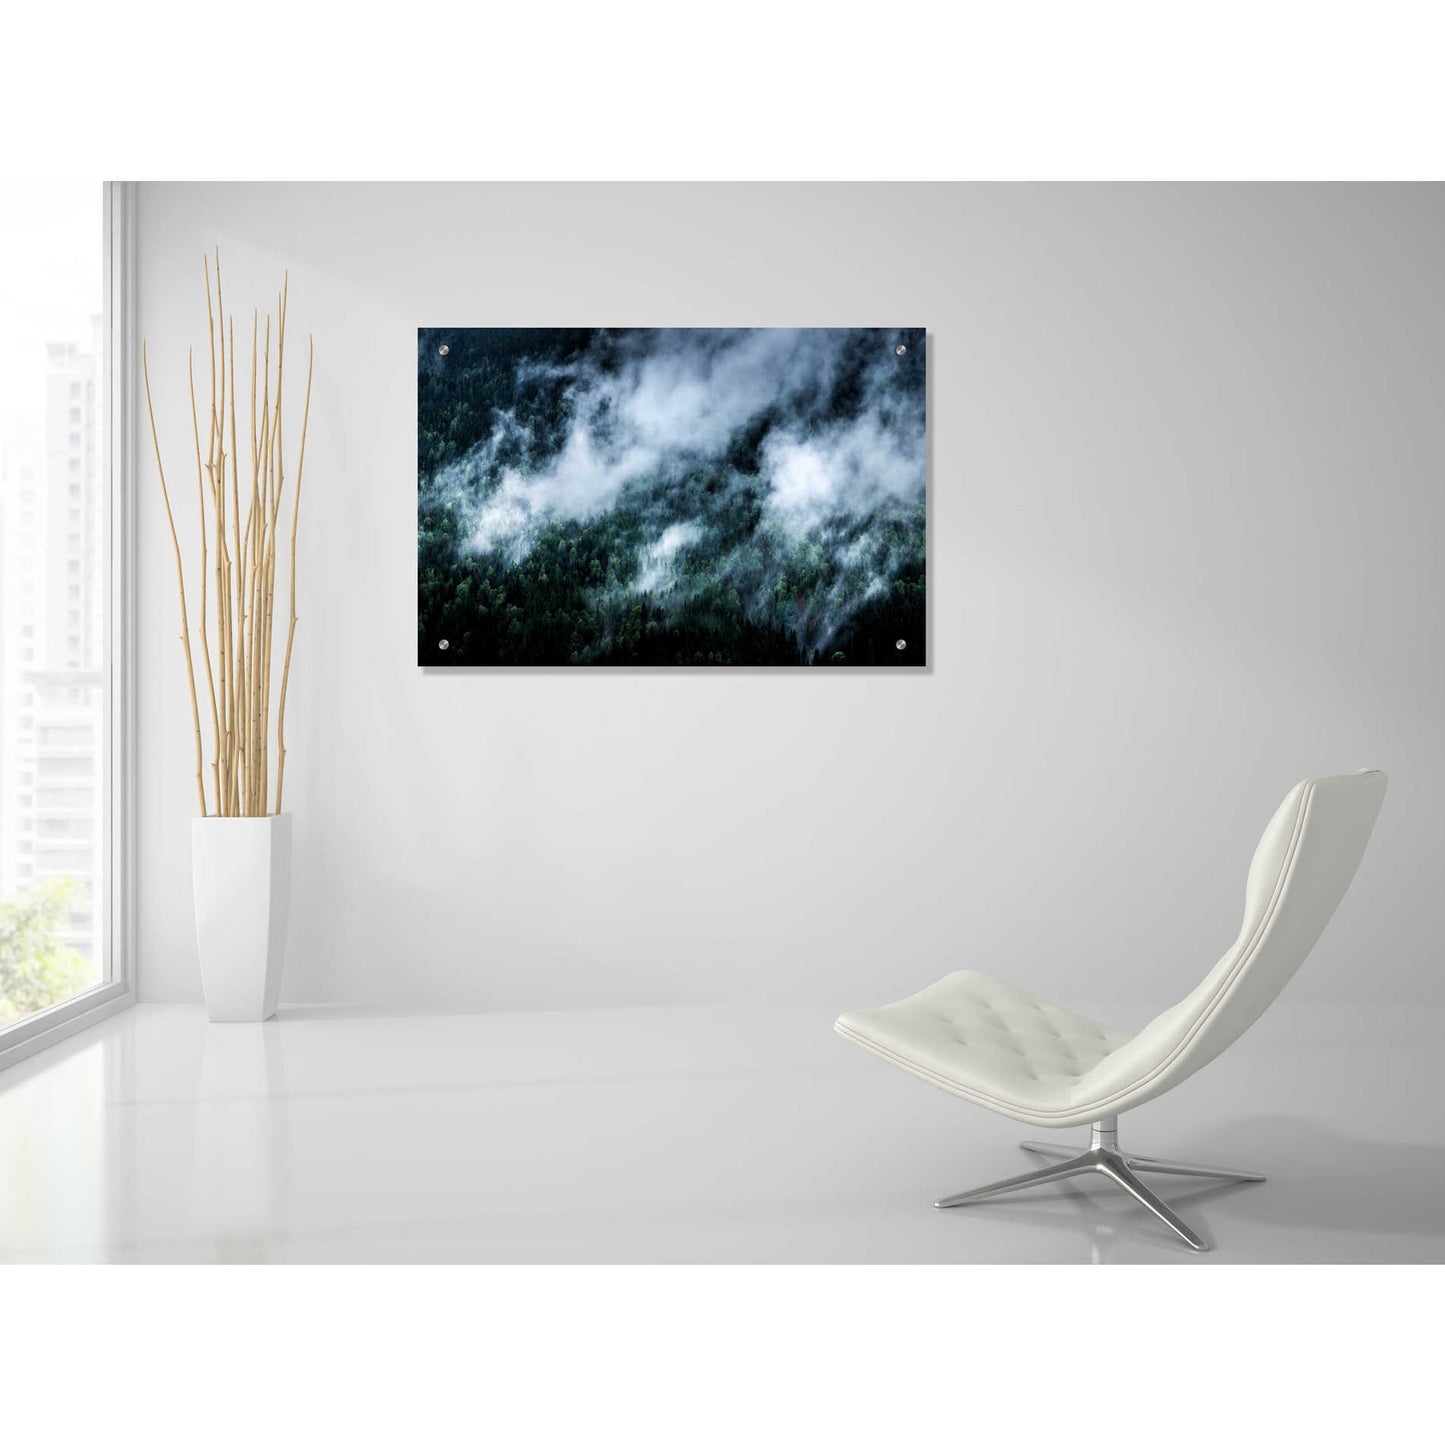 Epic Art 'Foggy Mornings In The Mountains' by Nicklas Gustafsson Acrylic Glass Wall Art,36x24